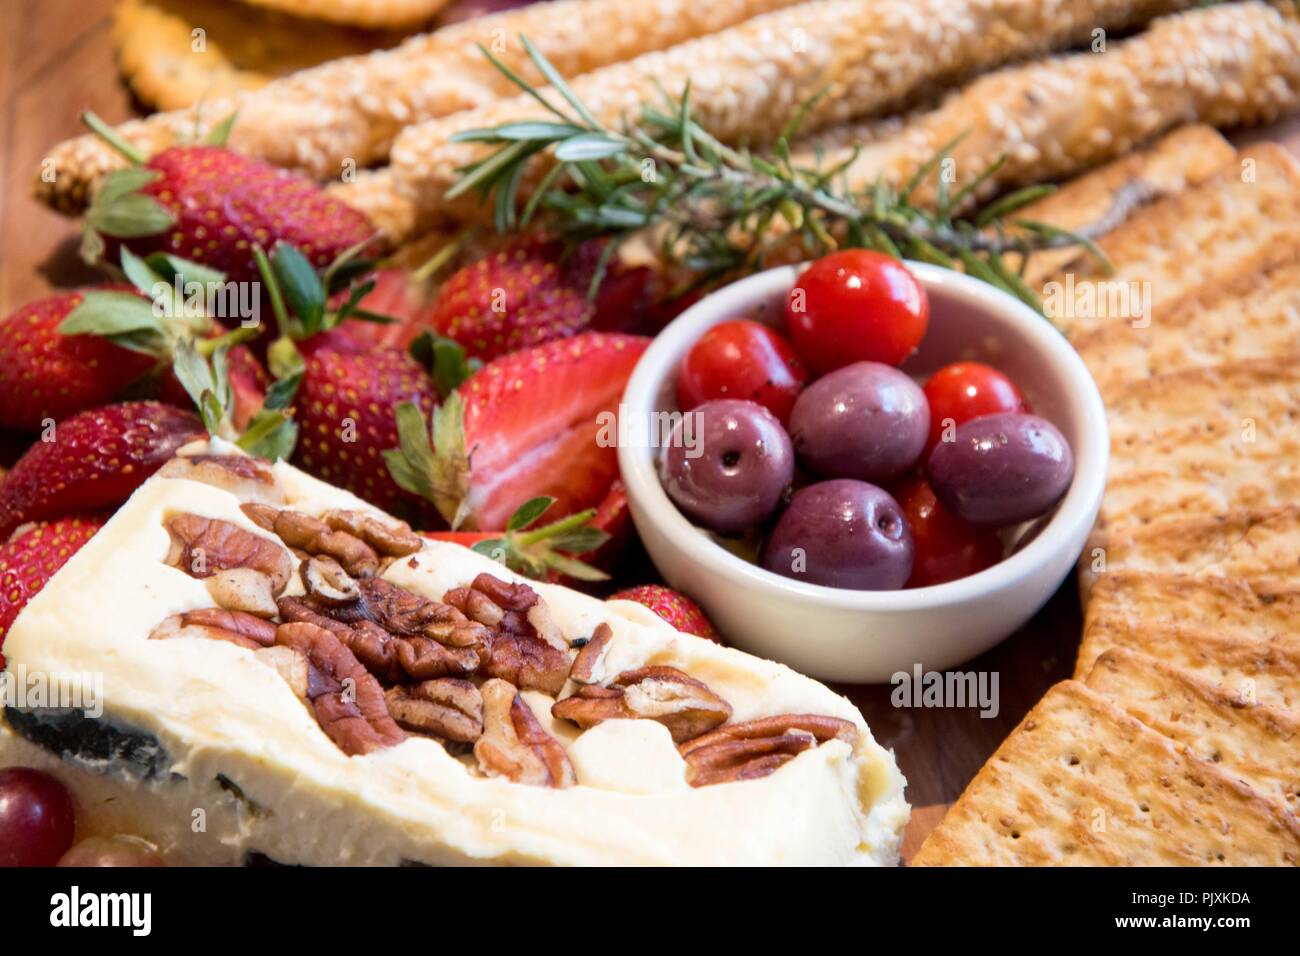 Lovely food treats and with cheese and biscuits Stock Photo